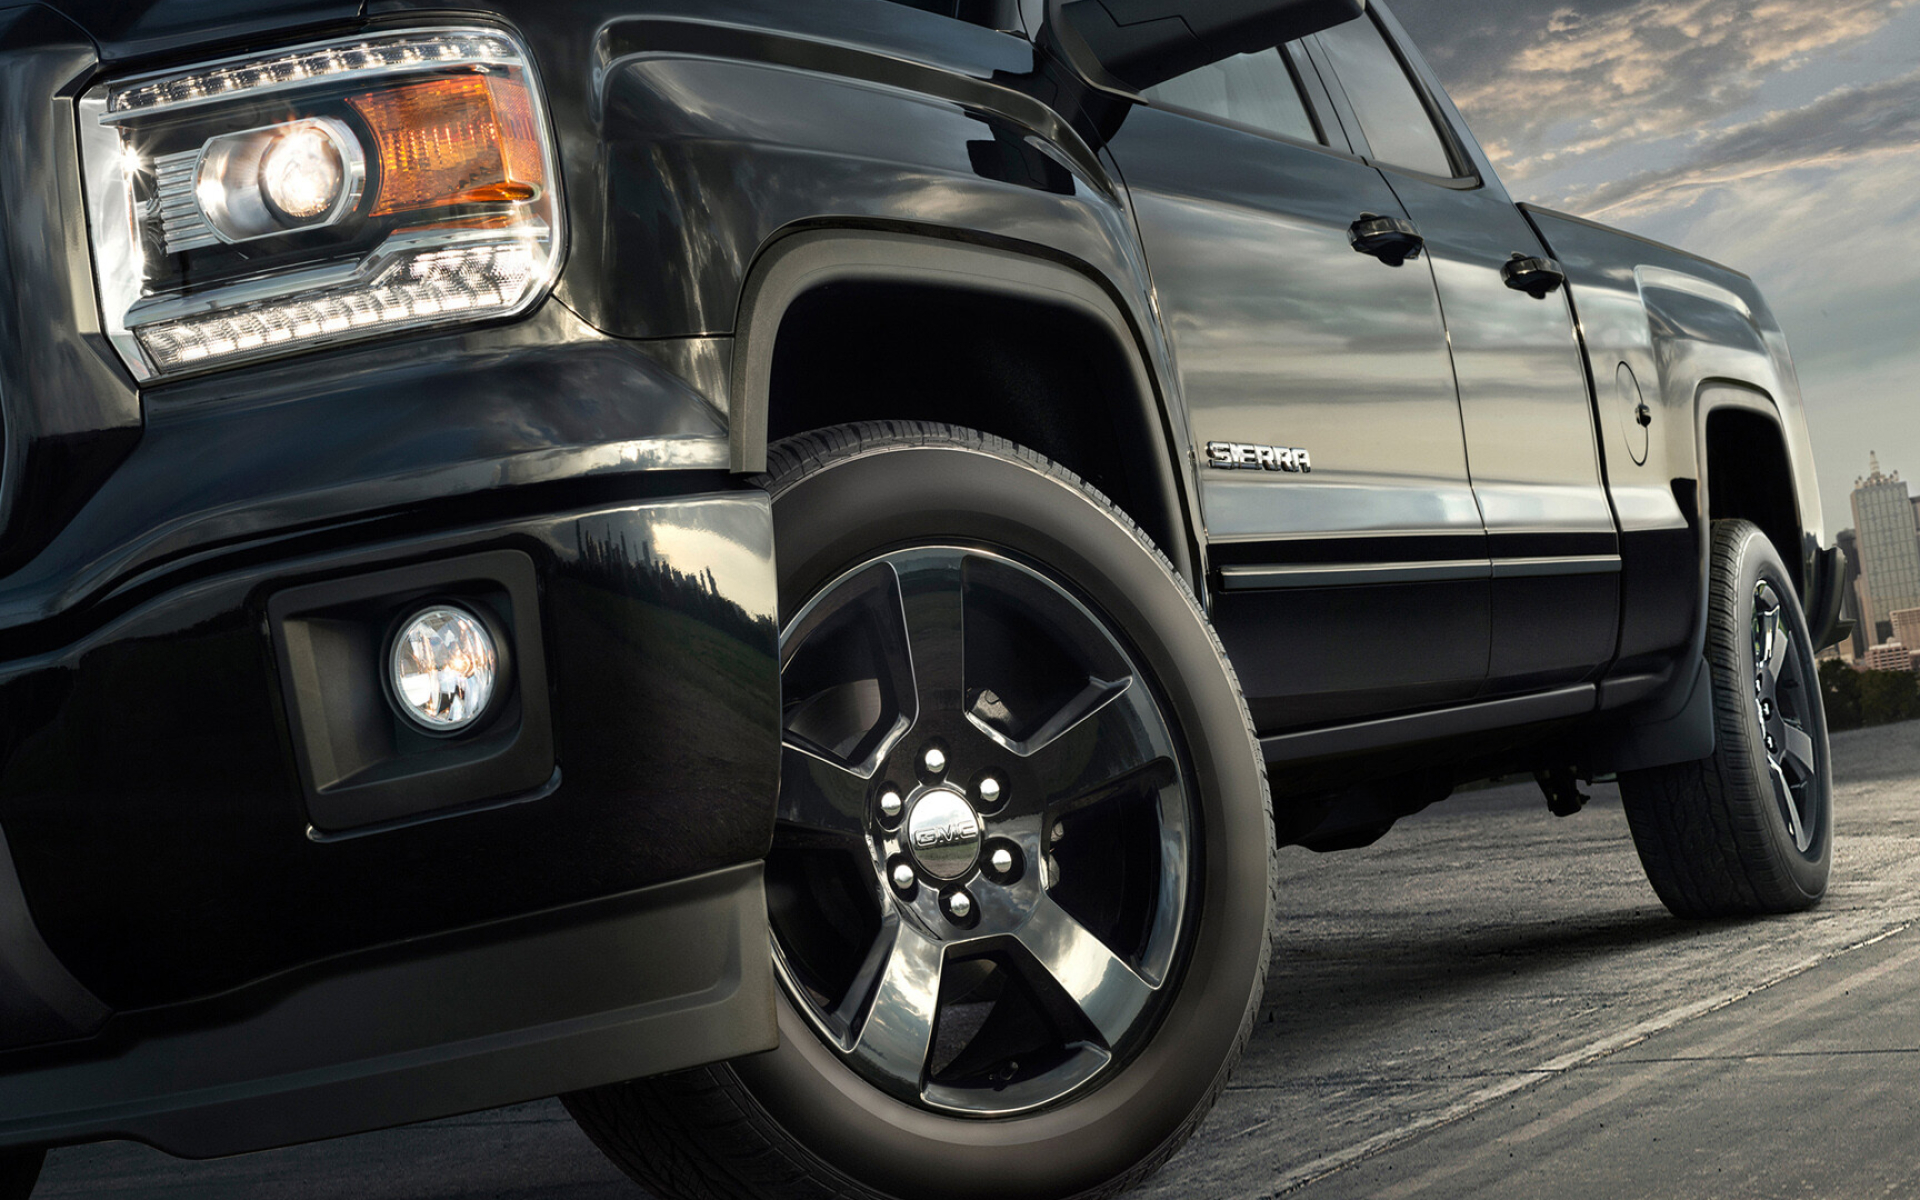 GMC Sierra: The division of the American automobile manufacturer, Off-road truck. 1920x1200 HD Wallpaper.